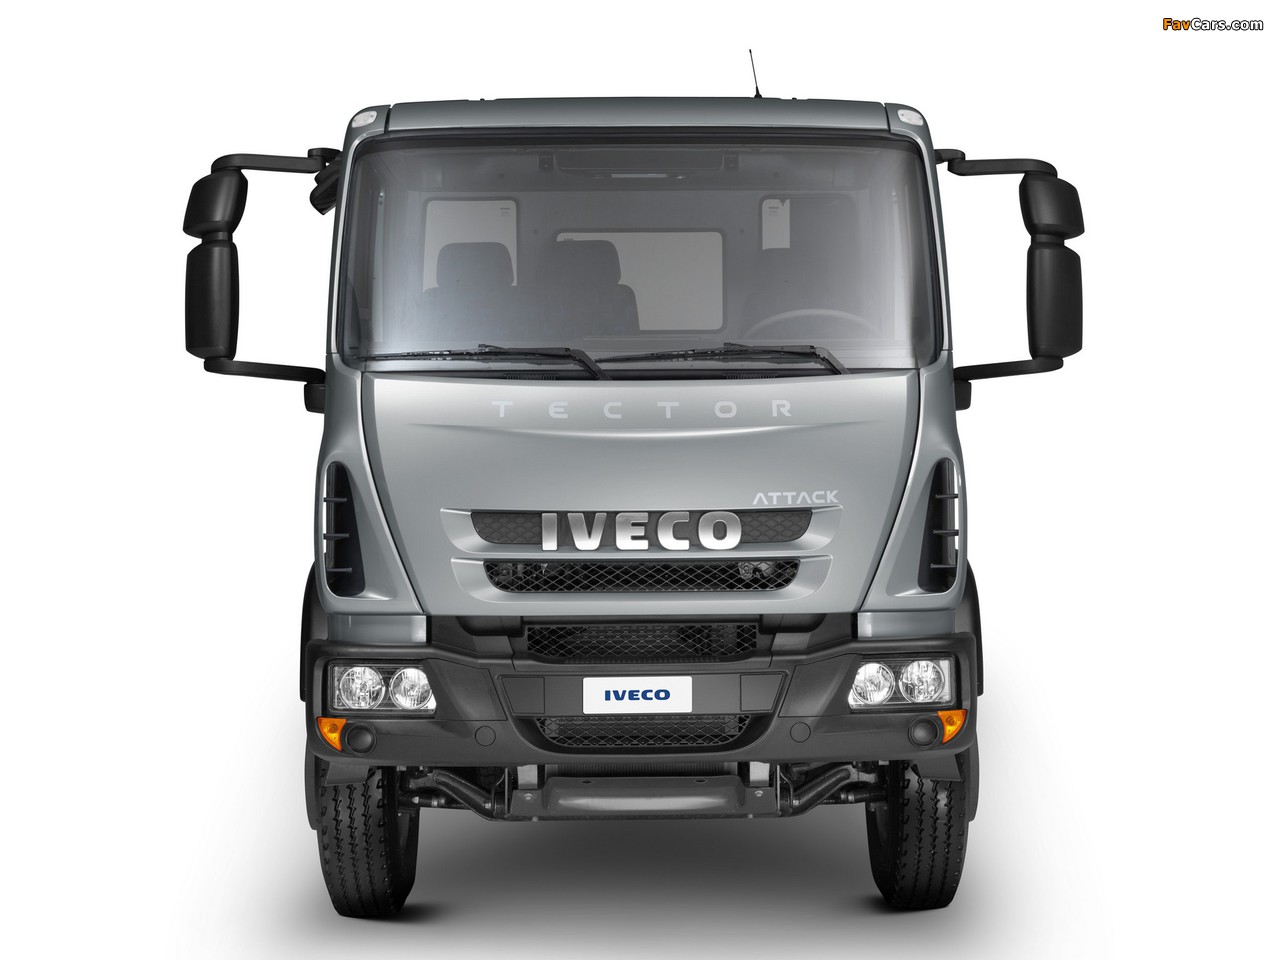 Iveco Tector Attack 4x2 2012 pictures (1280 x 960)